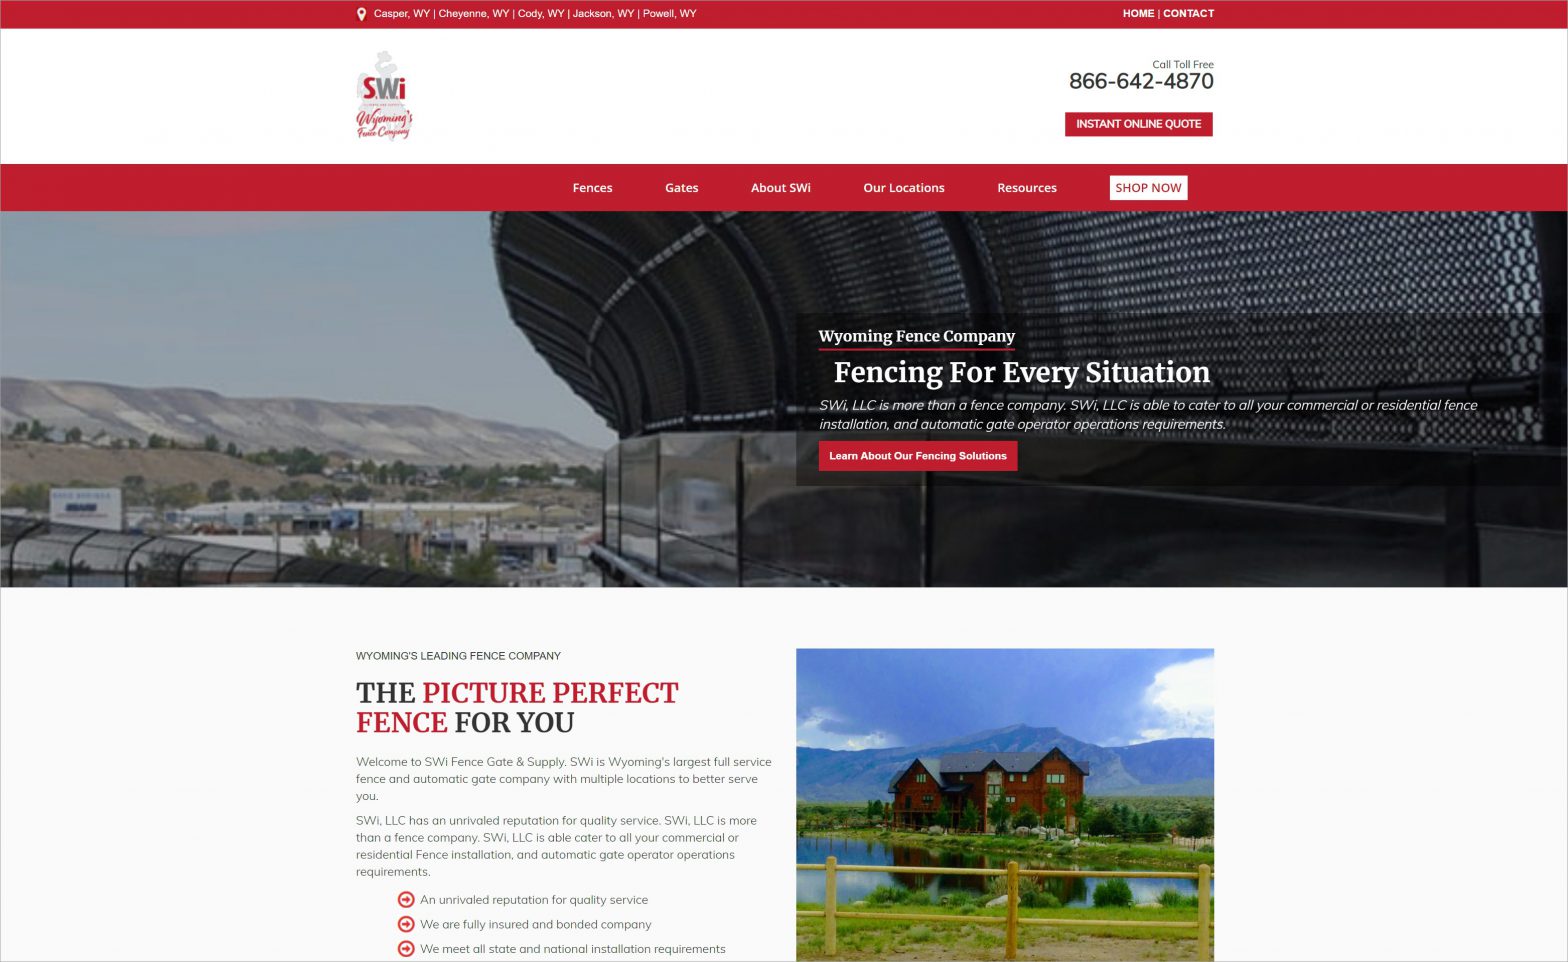 The Best Fence Company Website In Wyoming – Blog